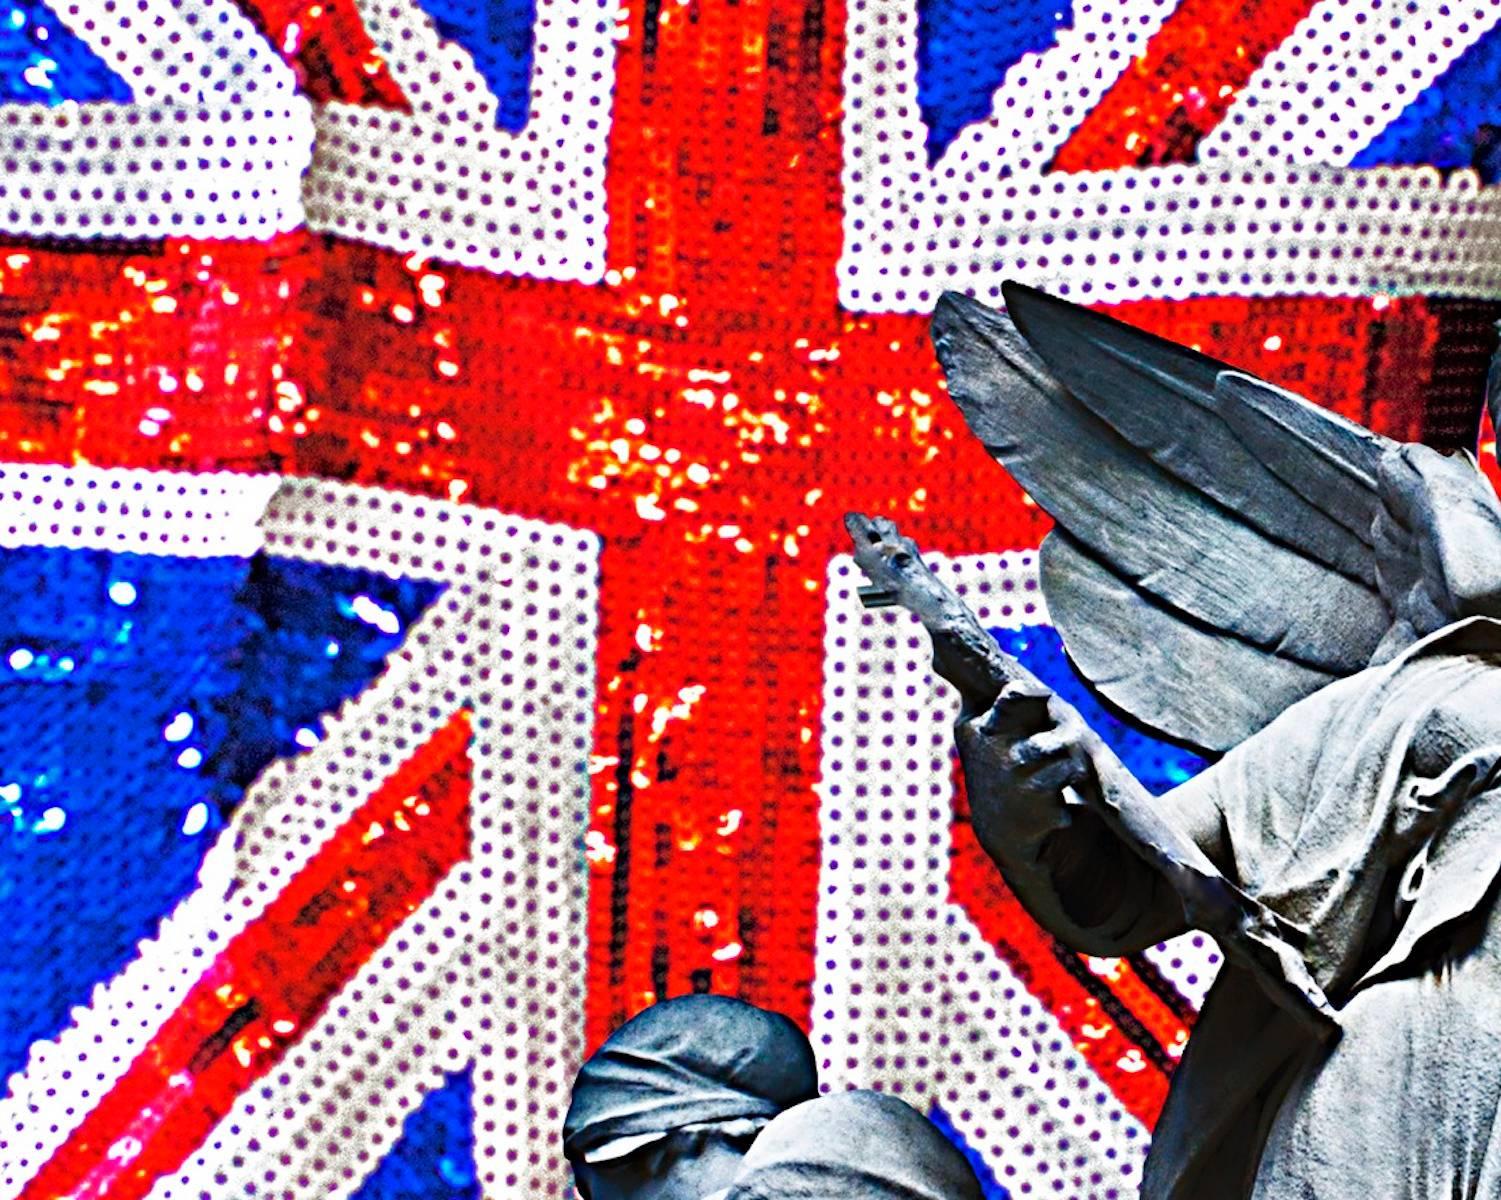 Statue on Union Jack Scarf - Contemporary Mixed Media Art by Julie Gardner